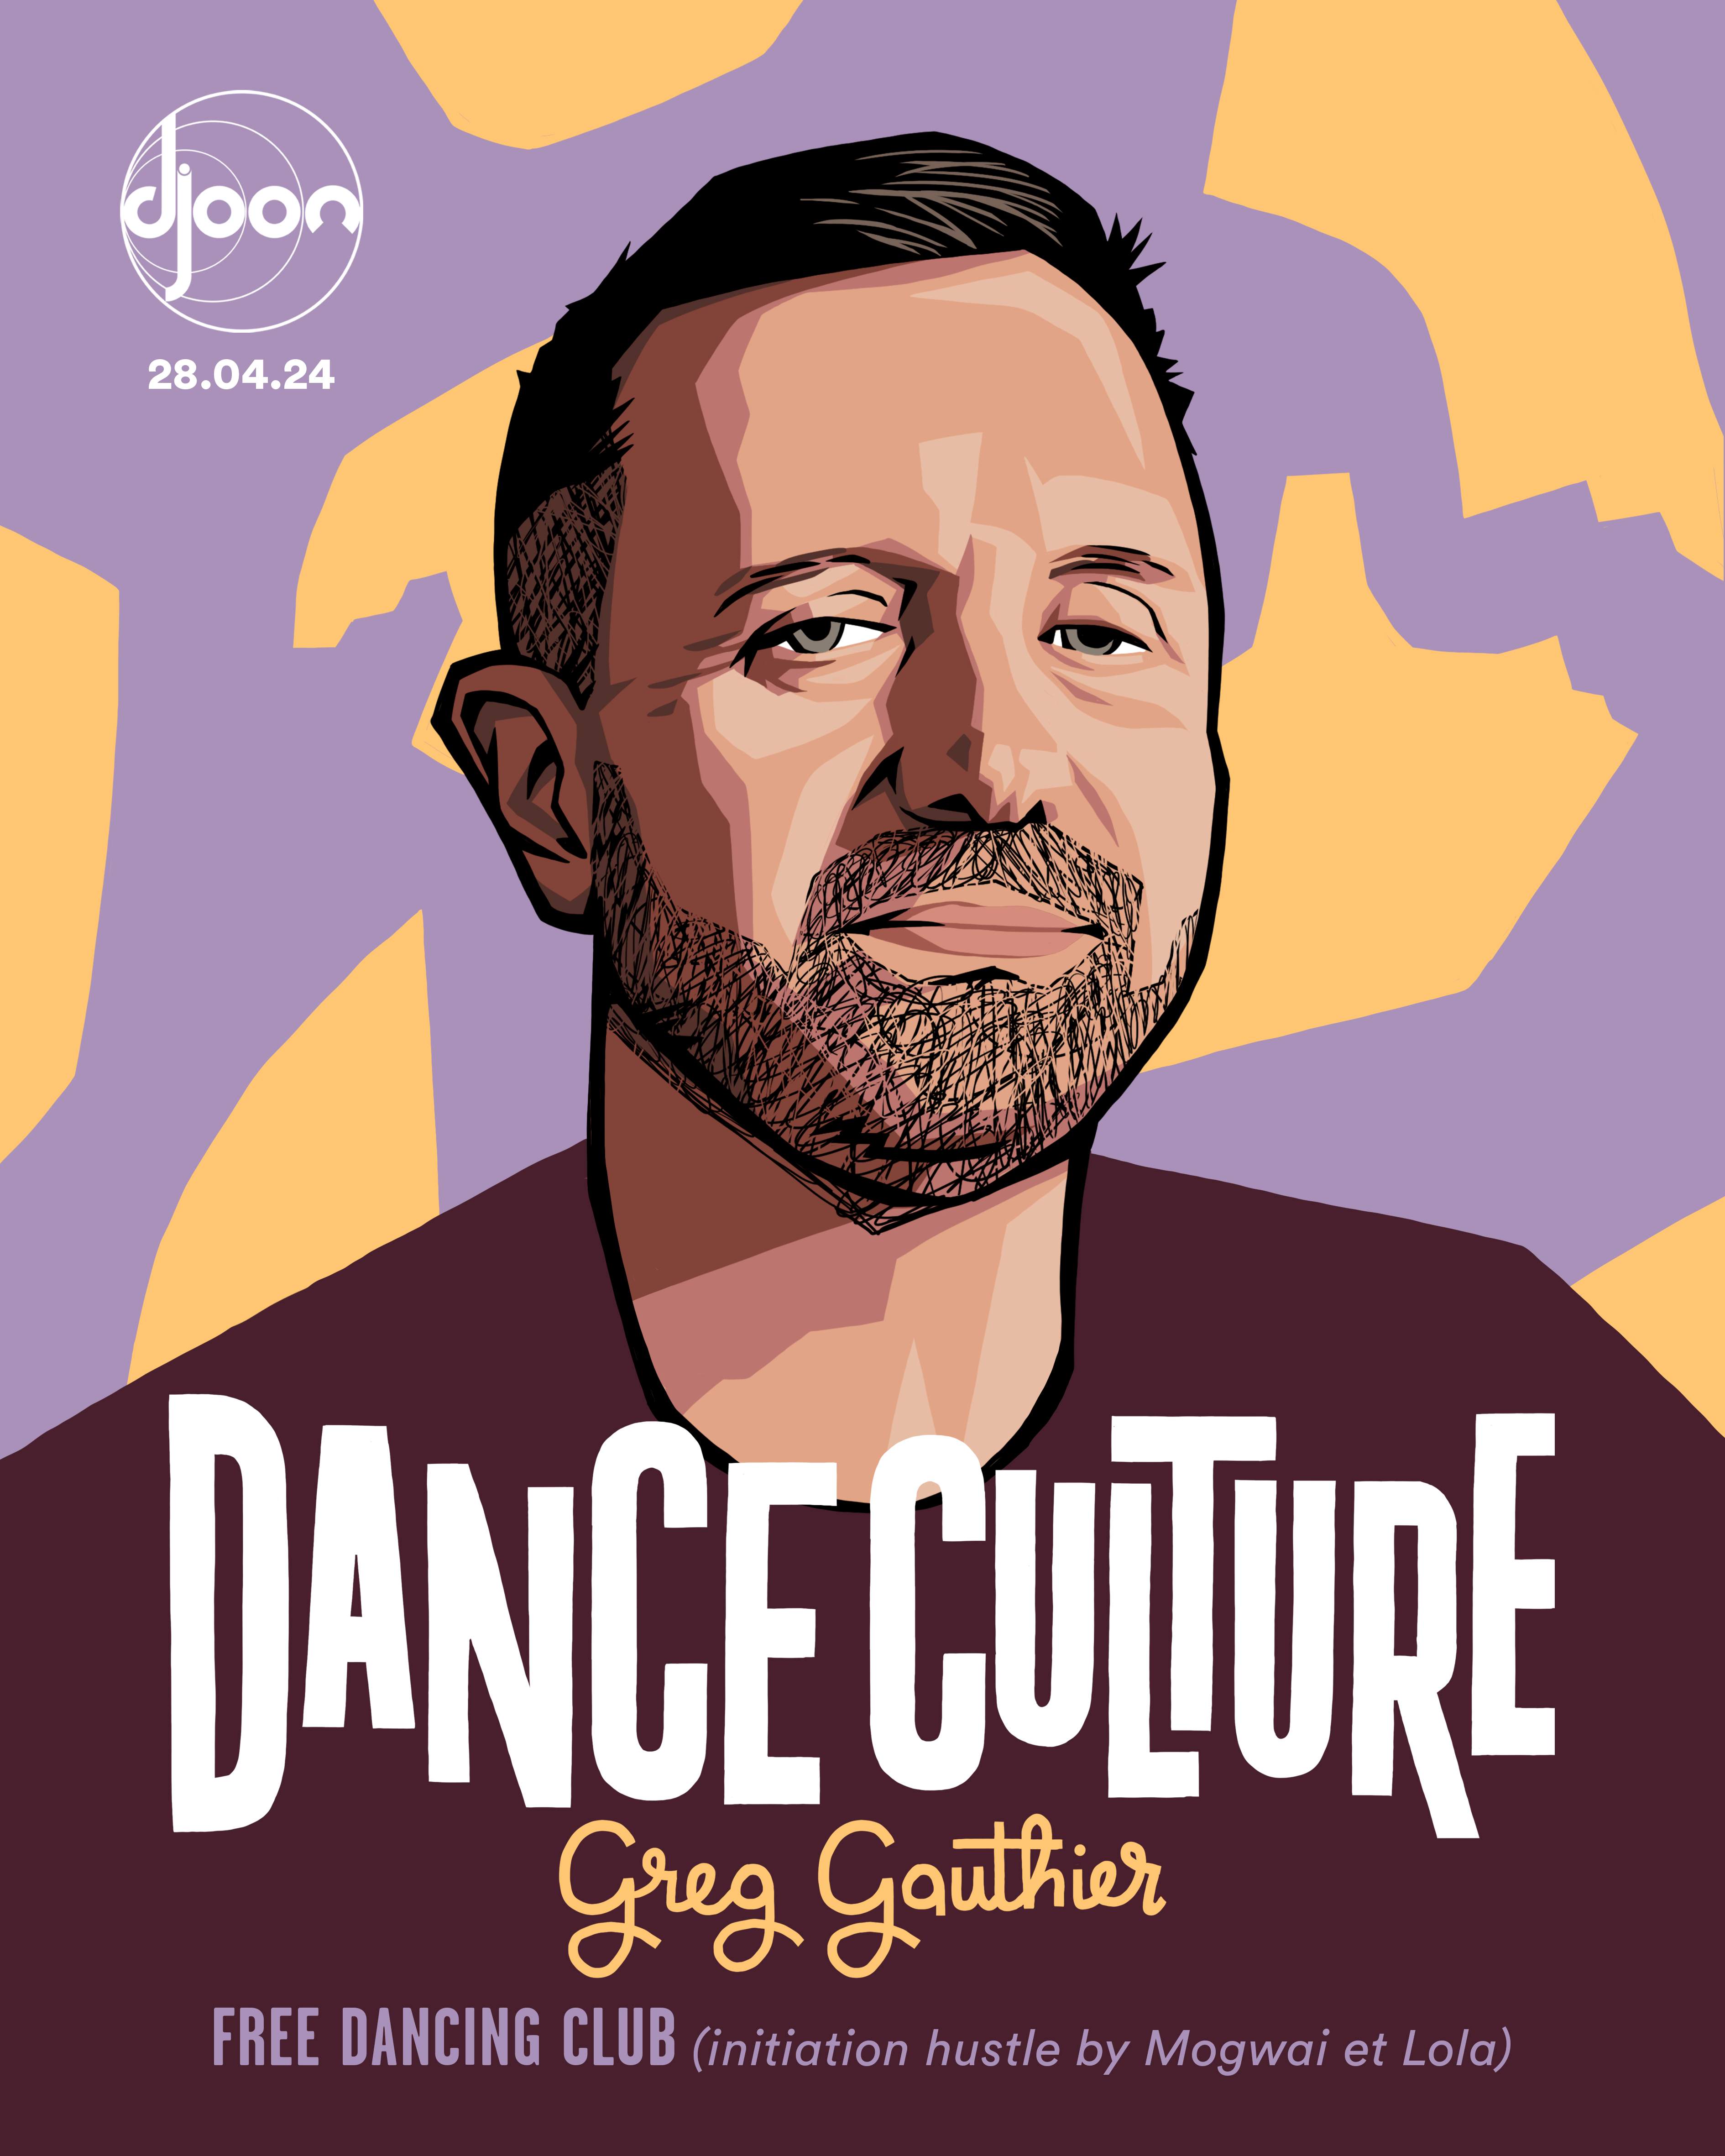 Djoon: Dance Culture with Greg Gauthier - フライヤー裏